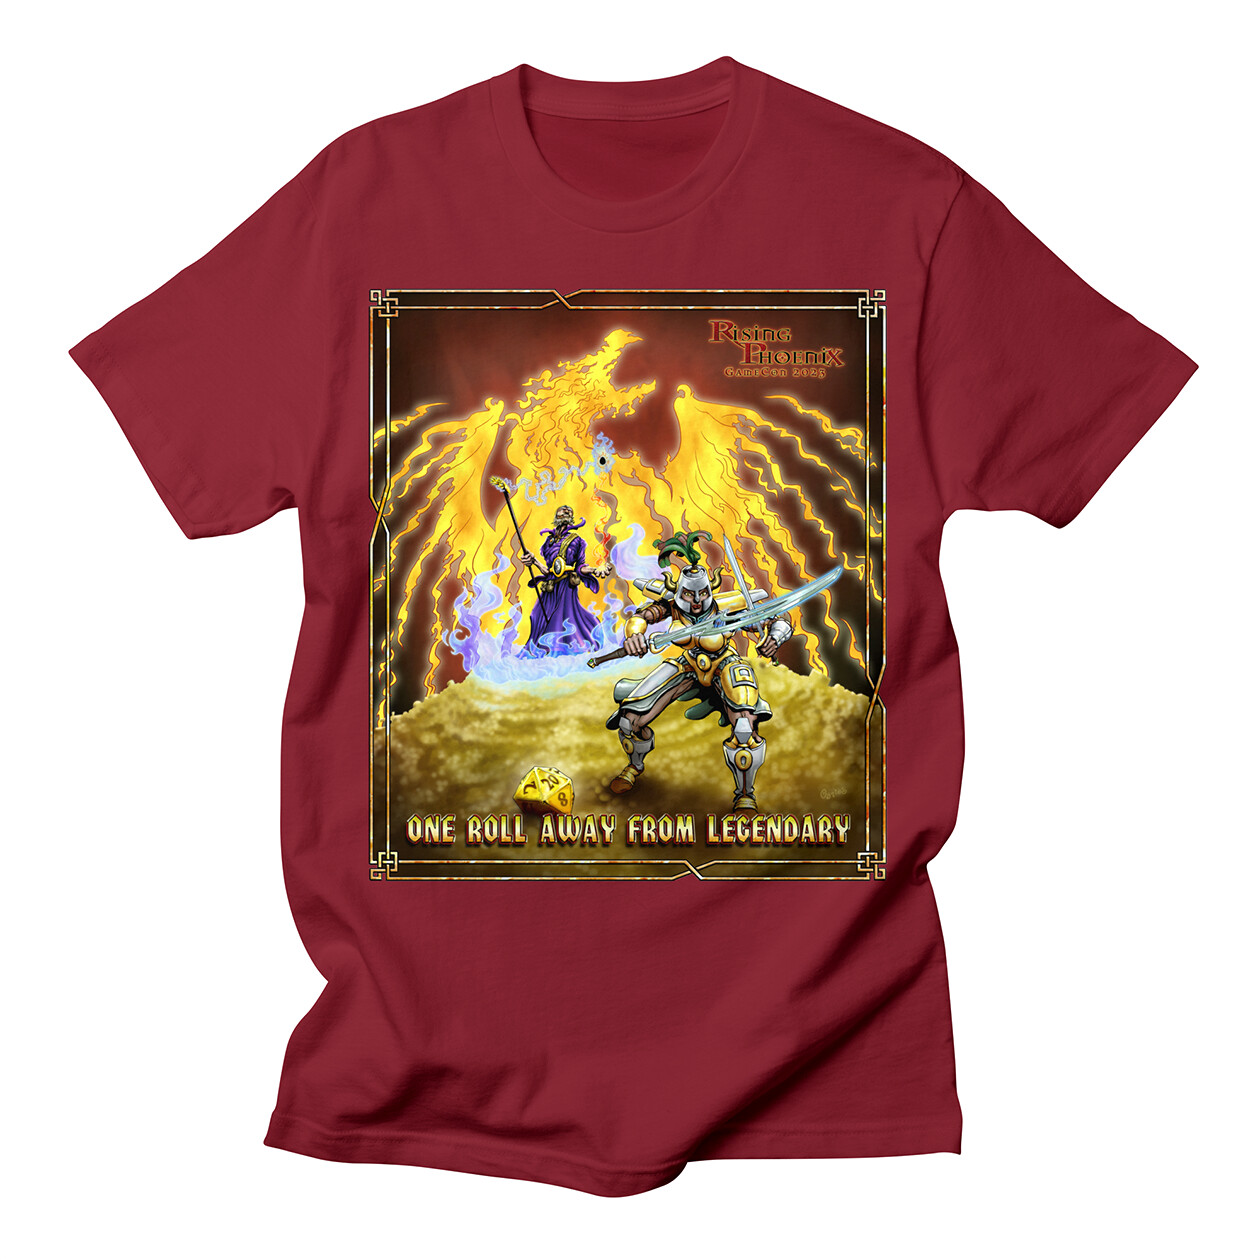 "Legendary" Annual Illustration and T-shirt Graphics for Rising Phoenix GameCon 2023